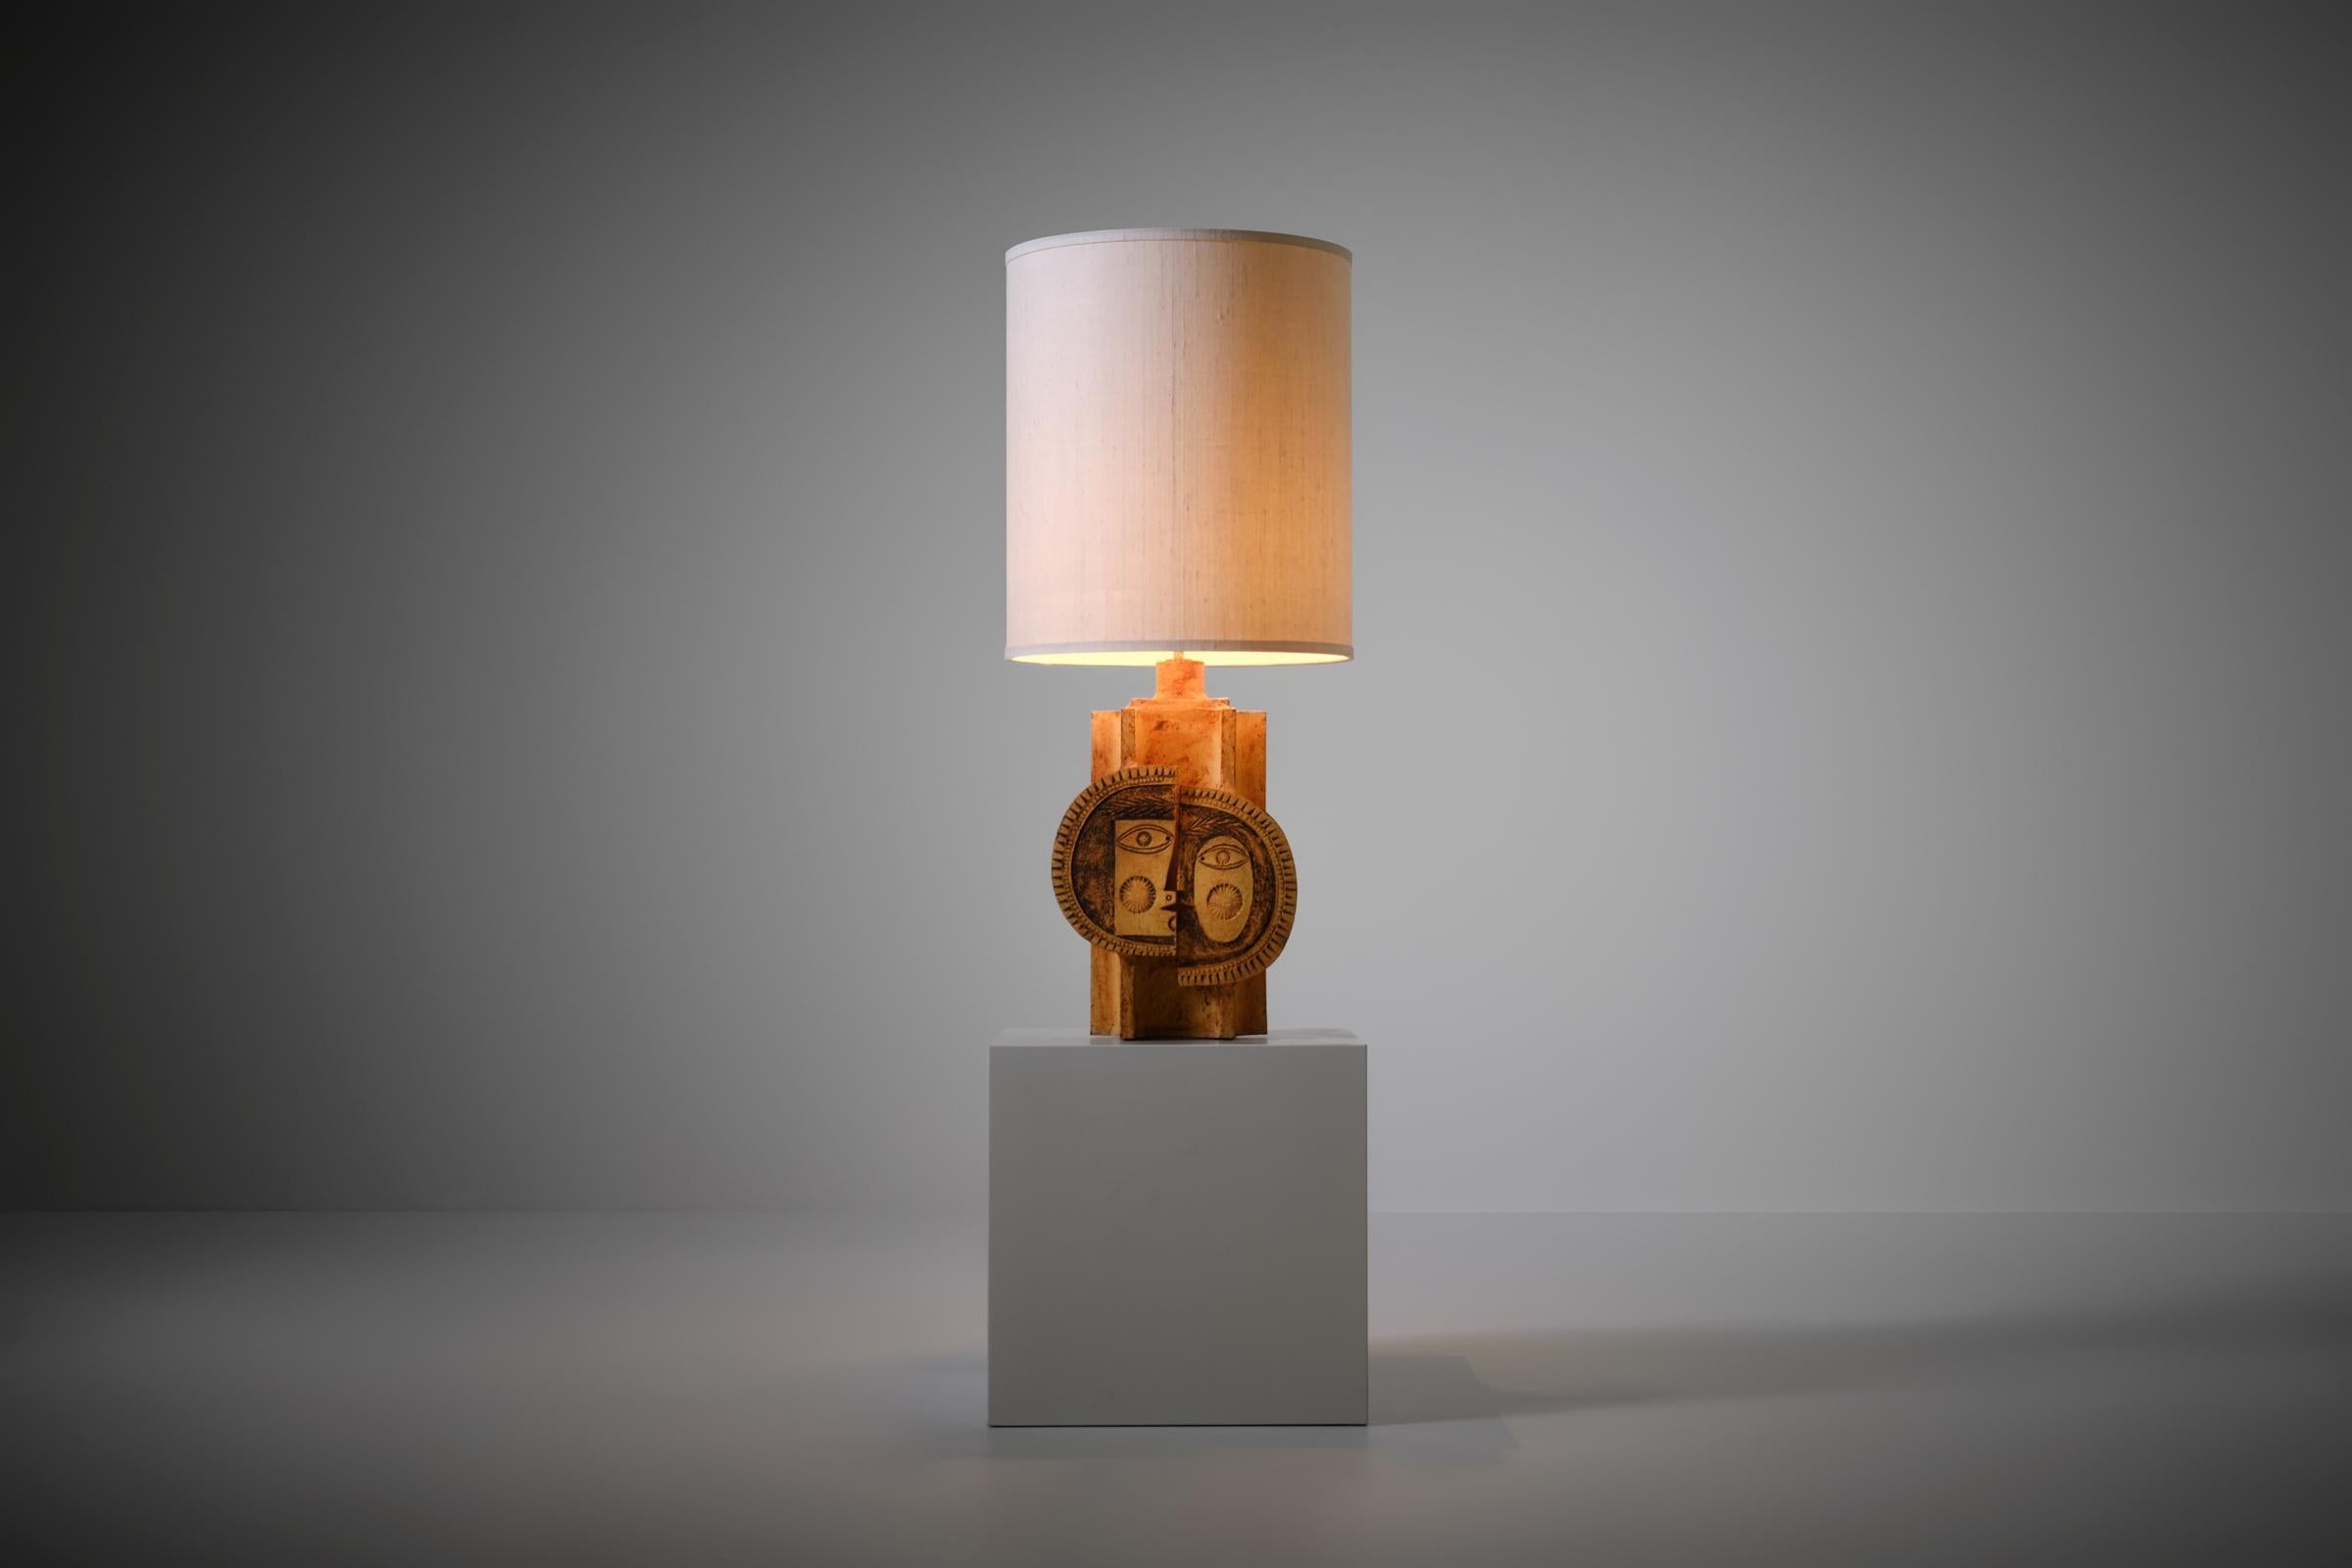 Roger Capron & Jean Derval ceramic table lamp, France 1970. Strong cubistic shape with a nice contrasting round medallion showing a refined textured drawing of a two faced sun. All is made by hand in a limited number and therefore each lamp is